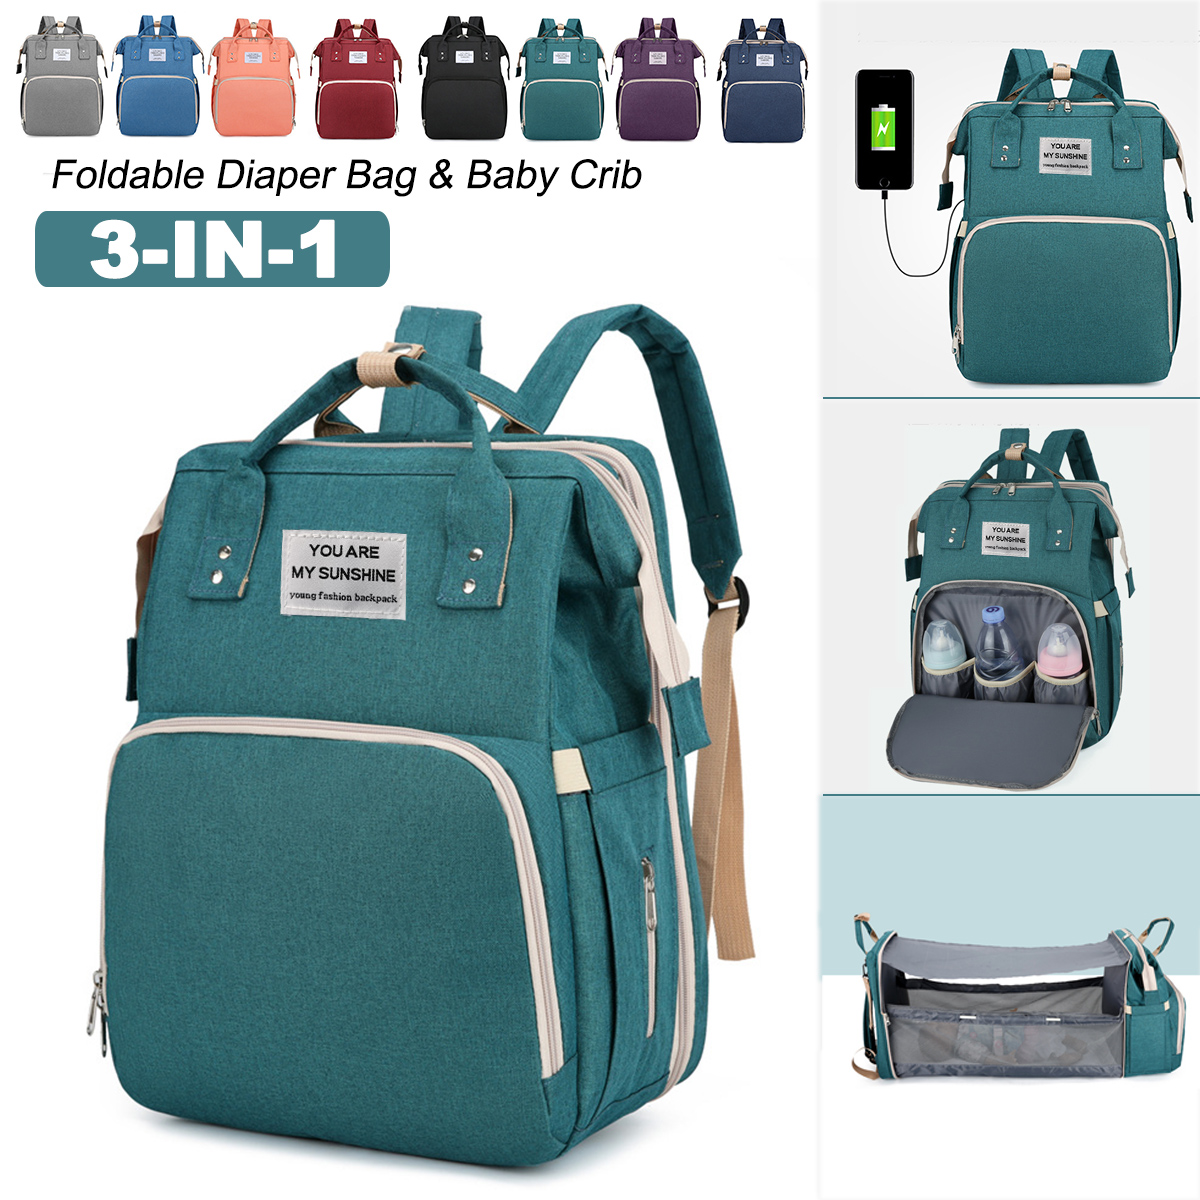 3-IN-1-Diaper-Bag--Baby-Crib-Backpack-Foldable-Nappy-Mommy-Bags-For-Mom-Dad-With-External-USB-Interf-1826523-2